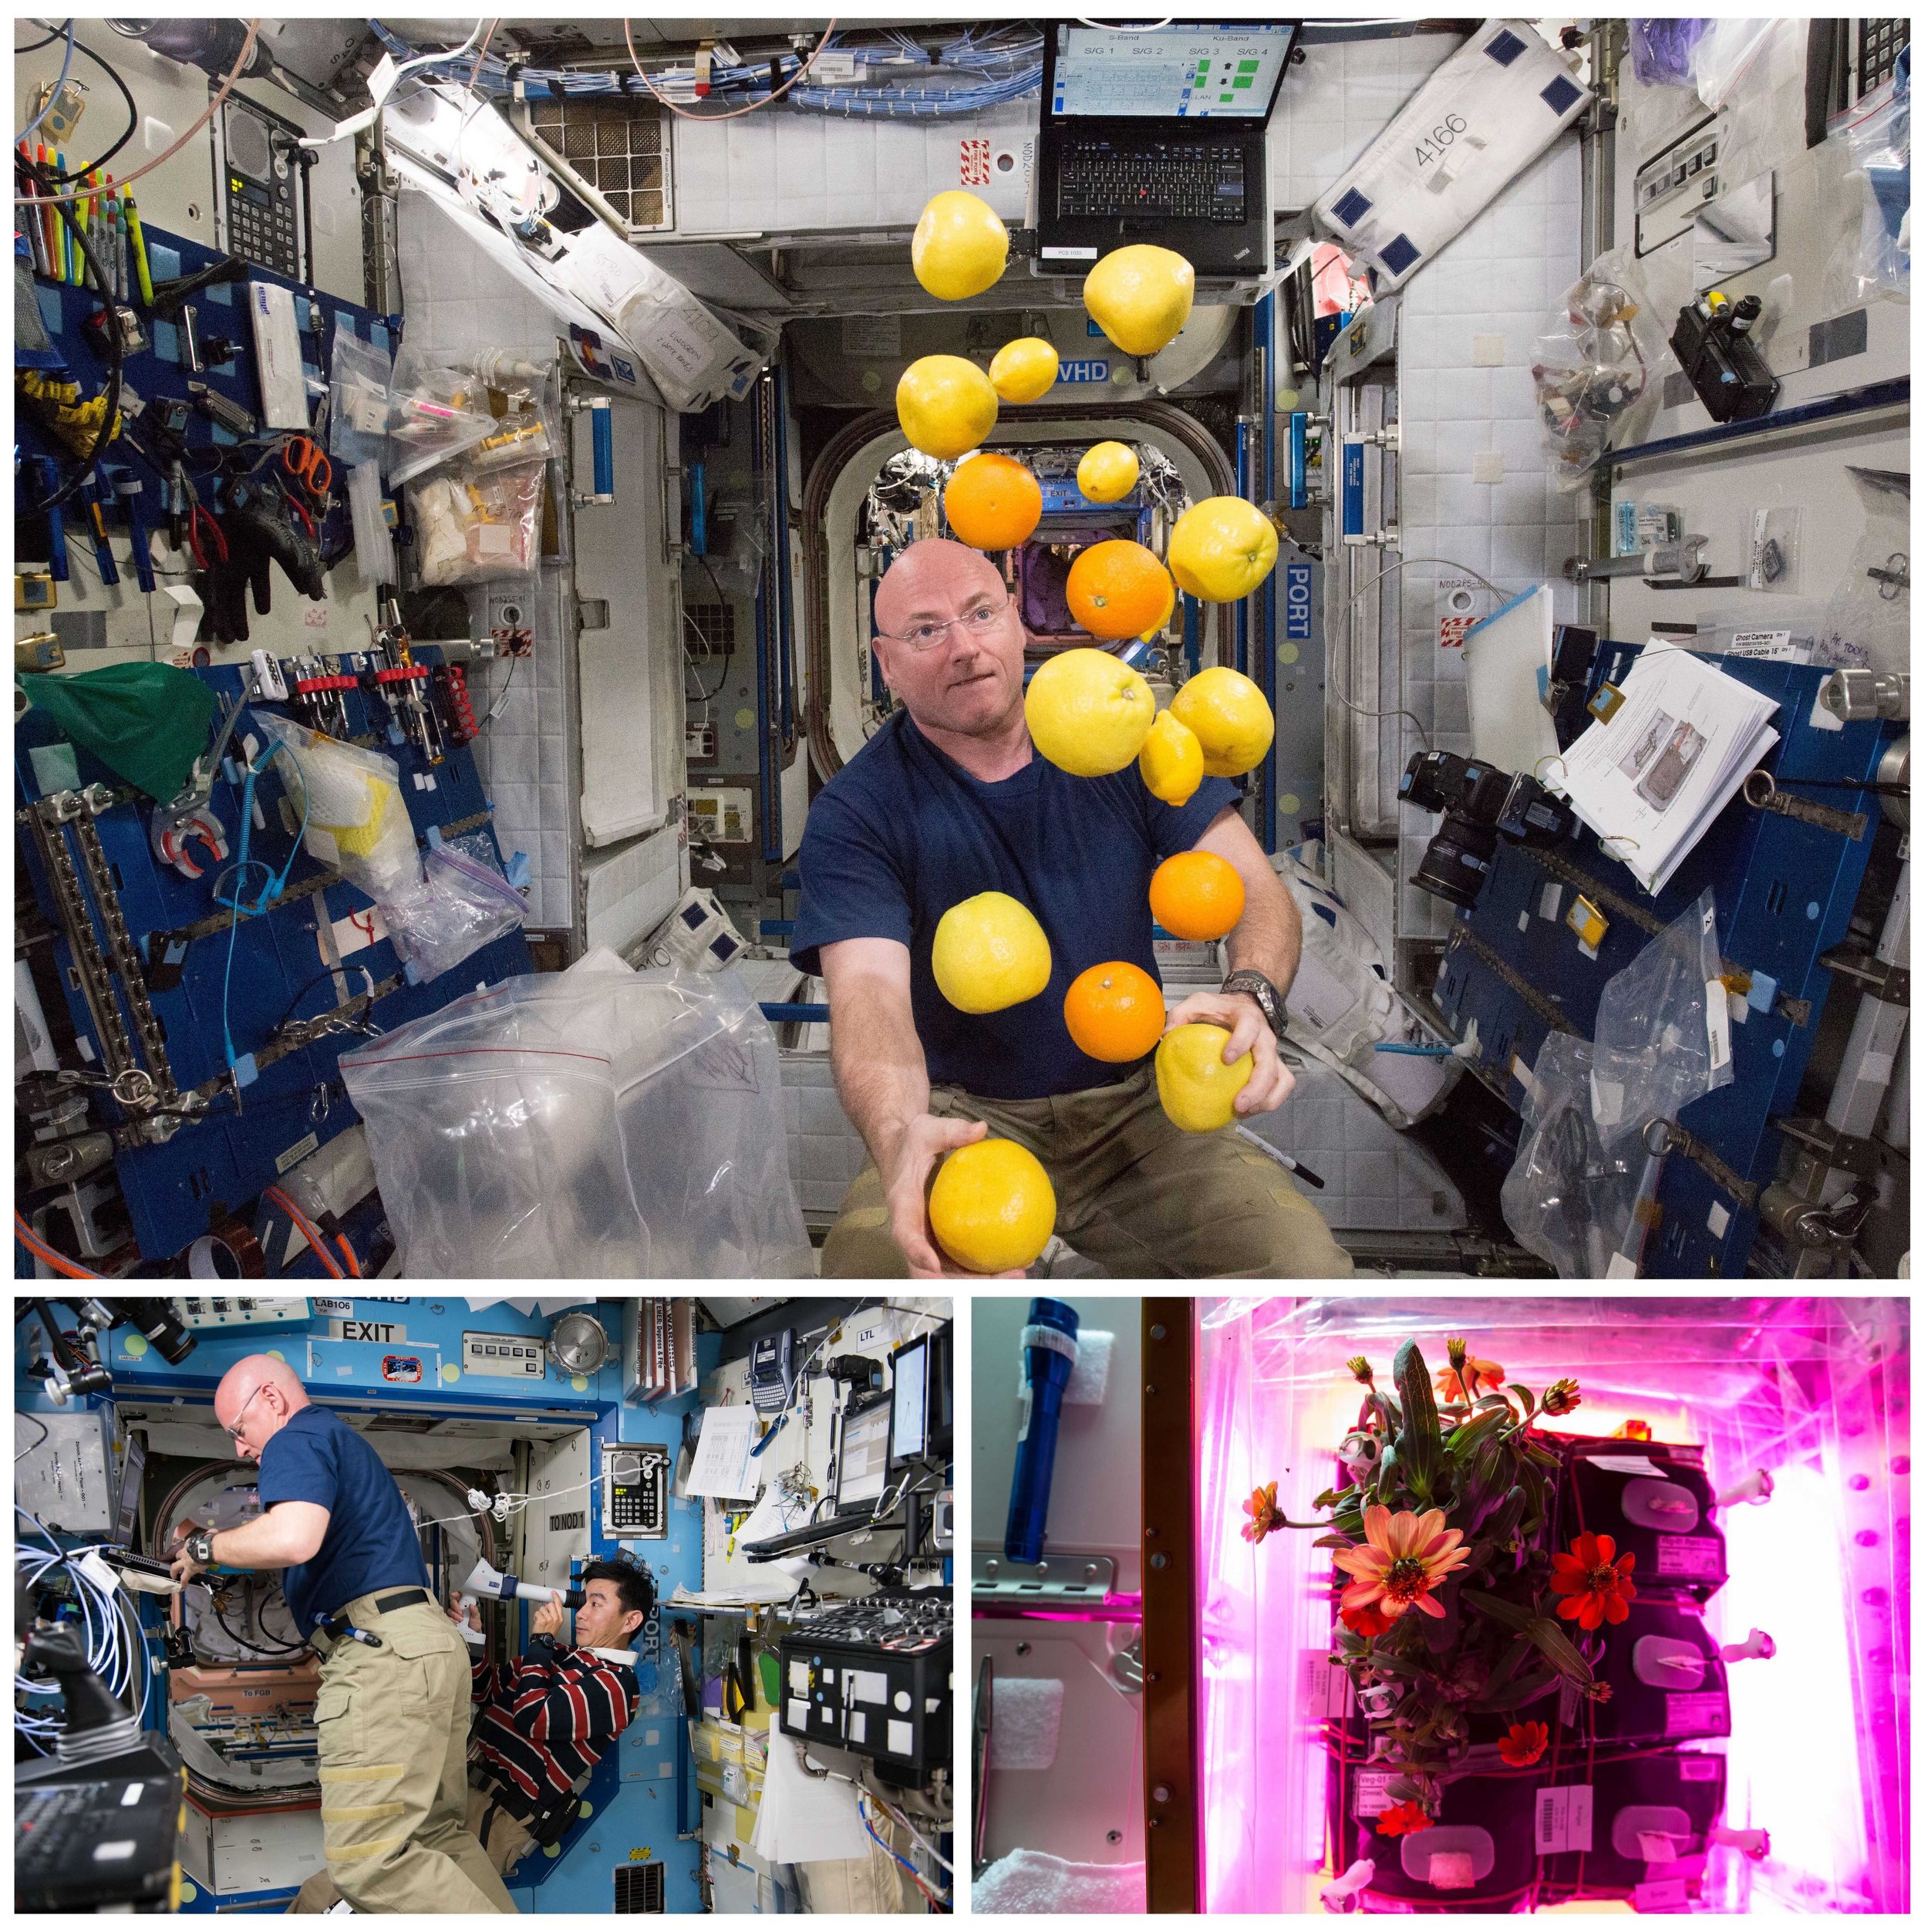 (Top) Kelly corrals a supply of fresh fruit that arrived on a Japanese cargo ship on Aug. 25. (Bottom left) Kelly assisted with numerous studies to see how prolonged spaceflight affects vision and other aspects of human health. The results of those tests won't be available for another year or so. (Bottom right) The crew also grew crops in zero gravity, including these zinnias. 